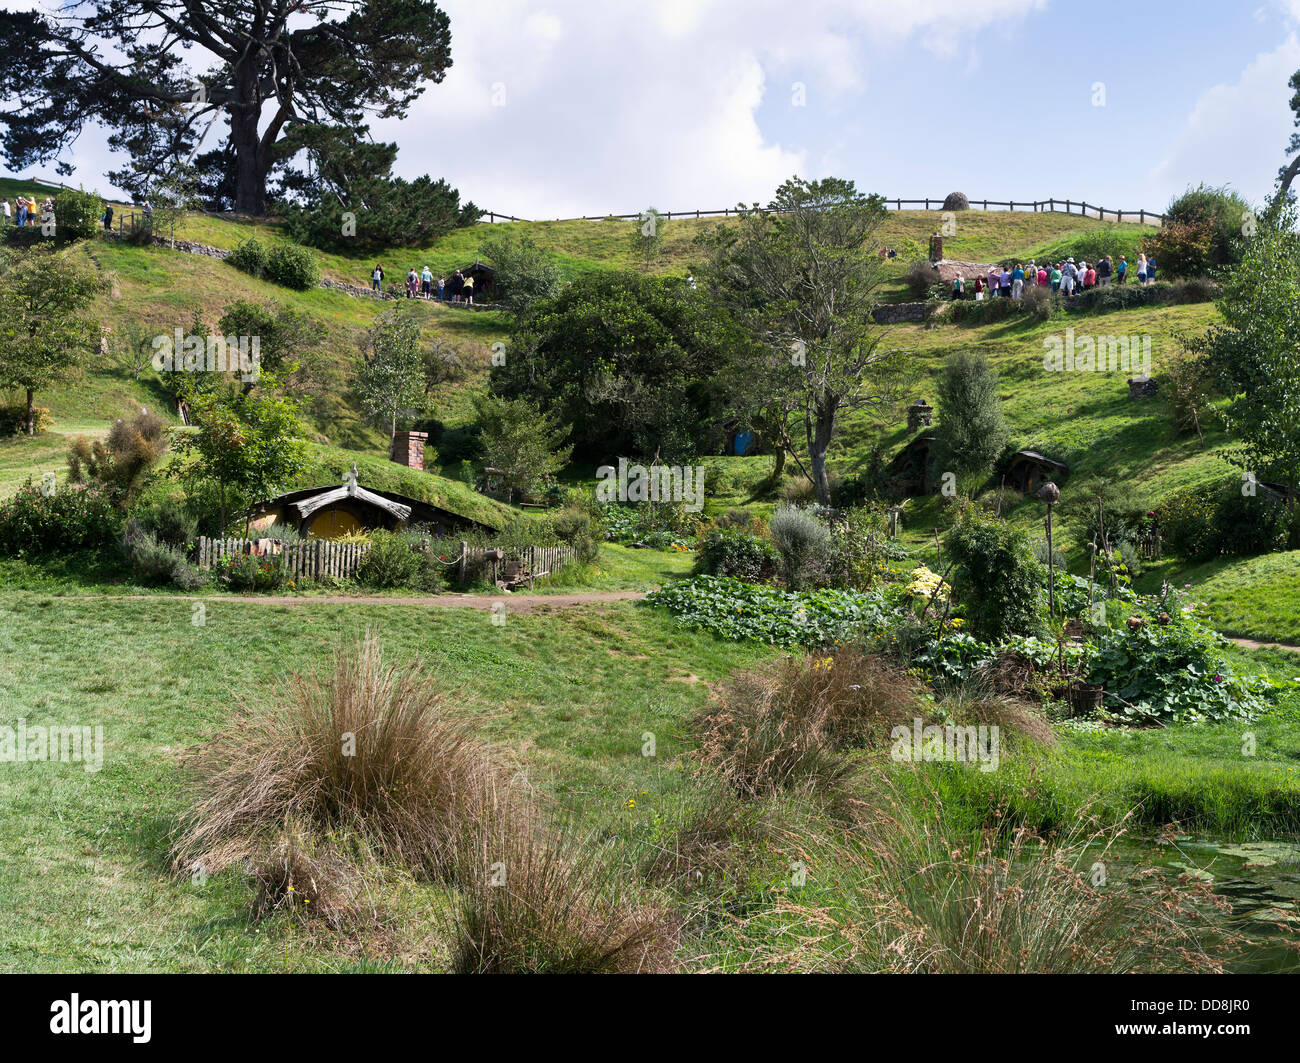 dh Lord of the Rings HOBBITON NEW ZEALAND Hobbits village tours film set movie site people middle earth Stock Photo